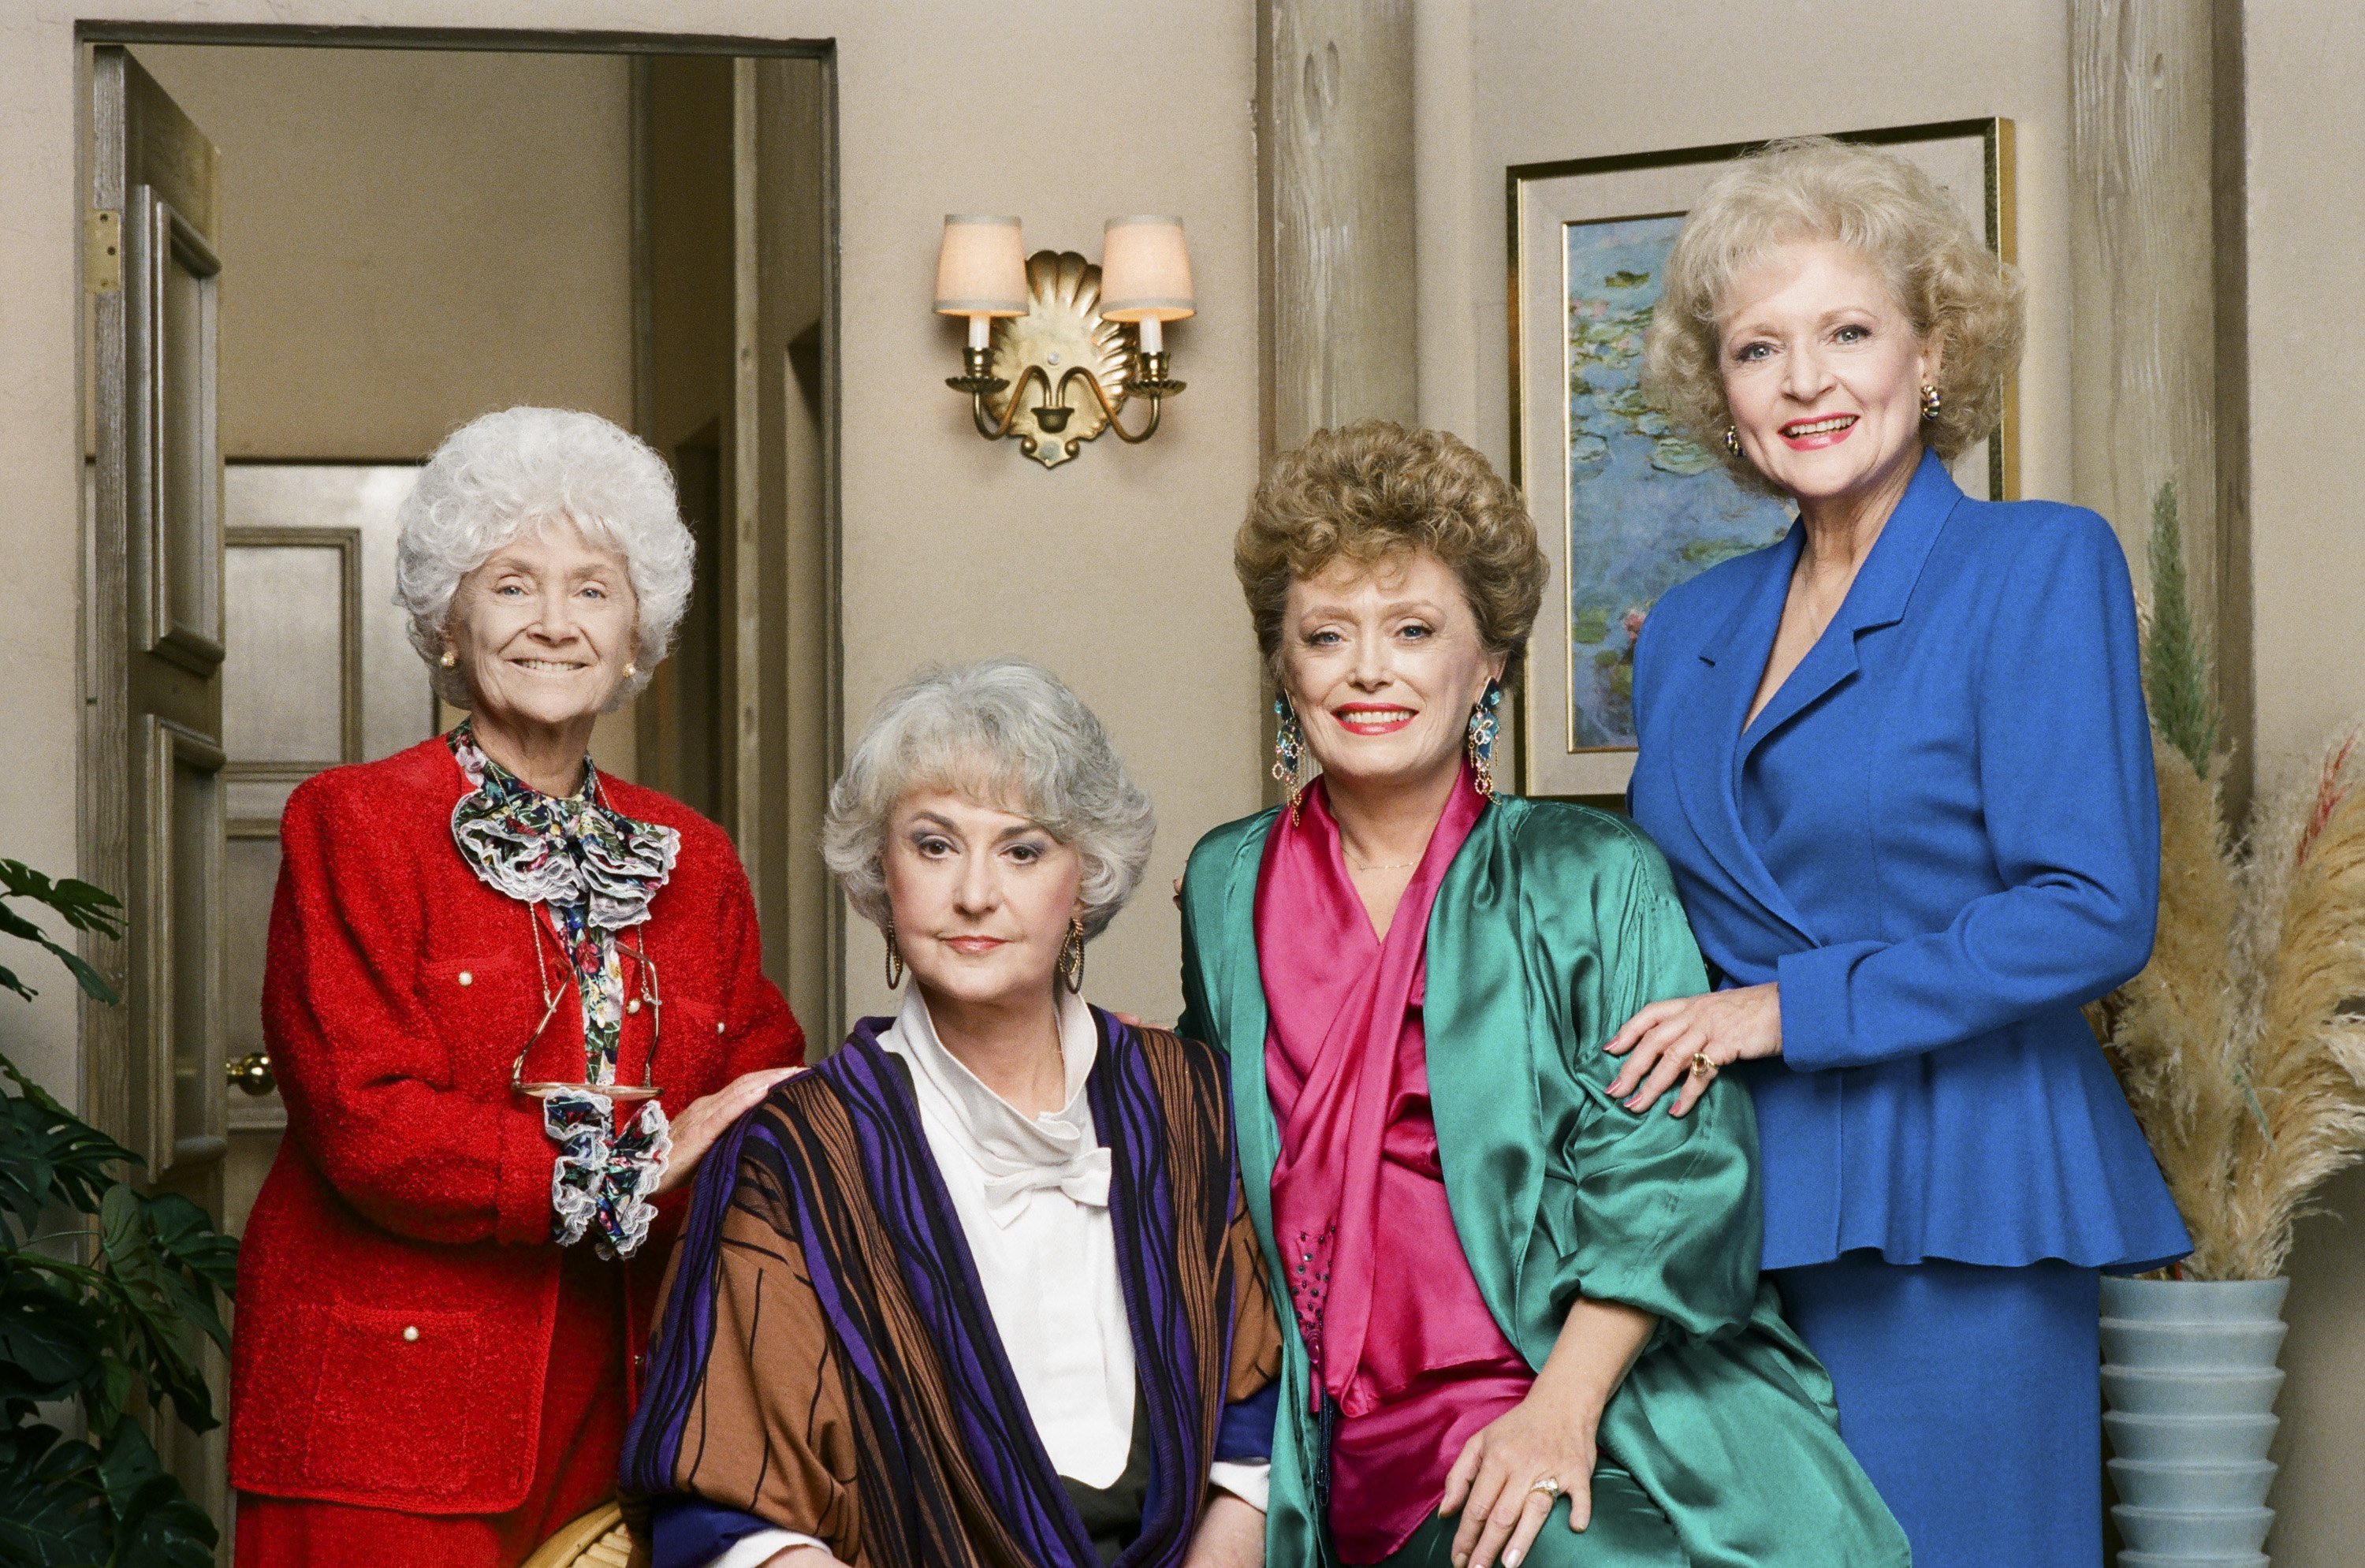 Estelle Getty as Sophia Petrillo, Bea Arthur as Dorothy Zbornak, Rue McClanahan as Blanche Devereaux and Betty White as Rose Nylund